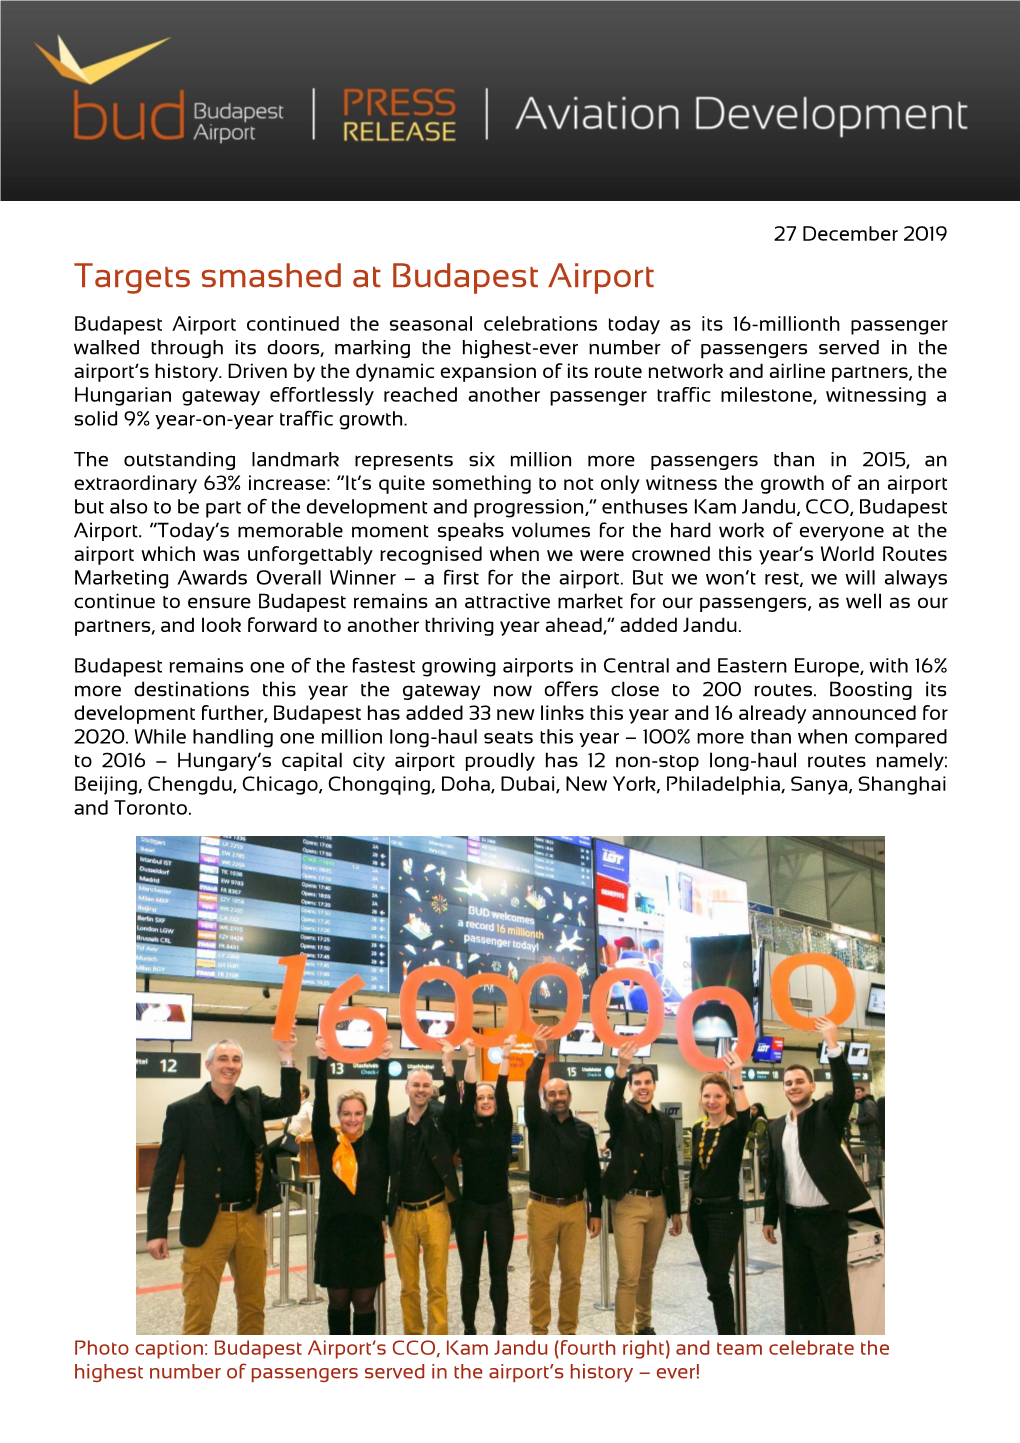 Targets Smashed at Budapest Airport